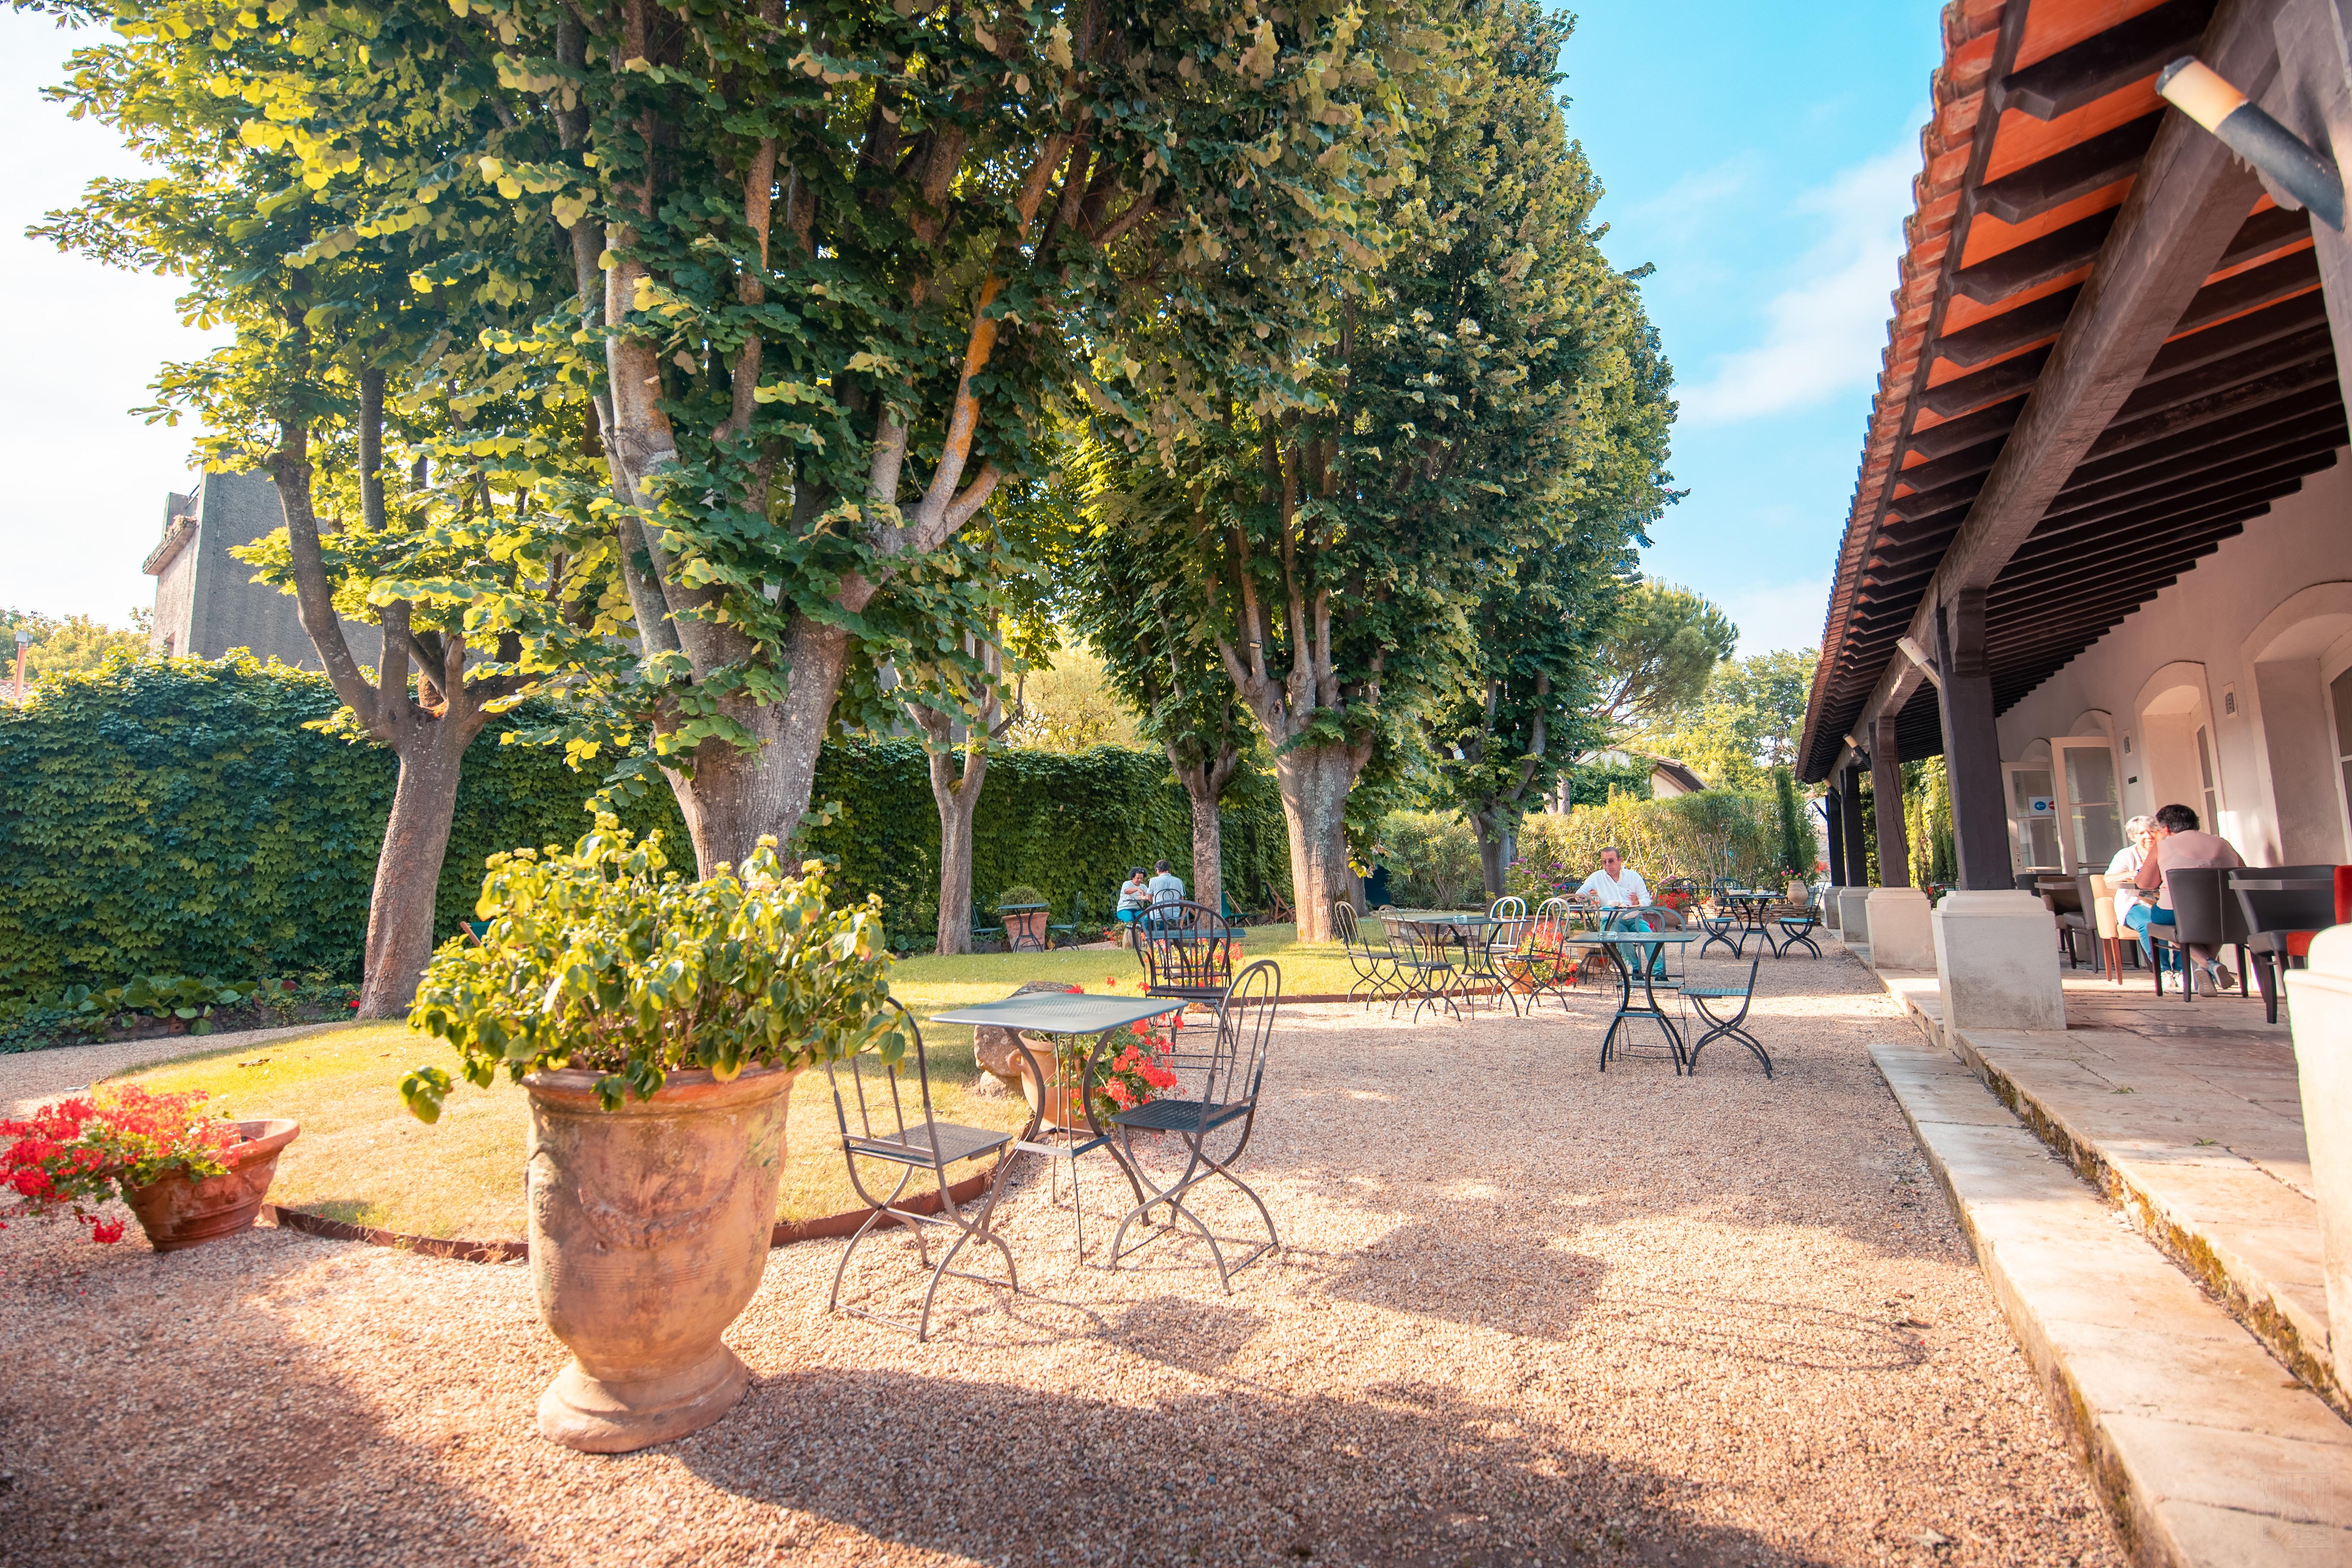 HOTEL L'ARAGON CARCASSONNE 3* (France) - from £ 70